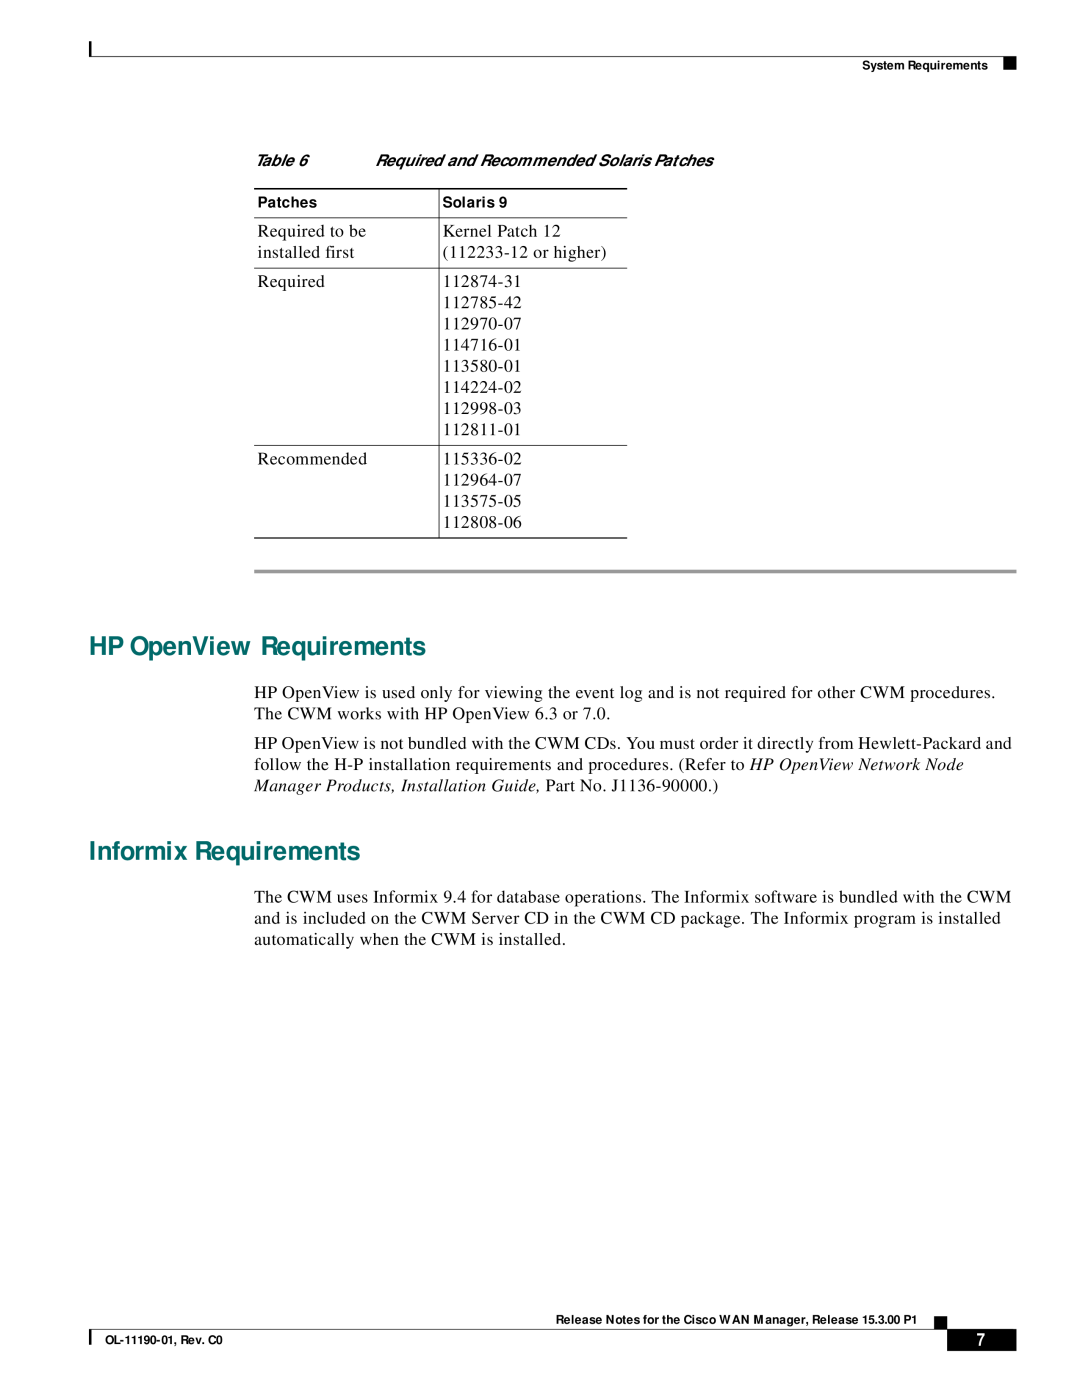 Cisco Systems 15.3.00P1 manual HP OpenView Requirements, Informix Requirements, Patches, Solaris 